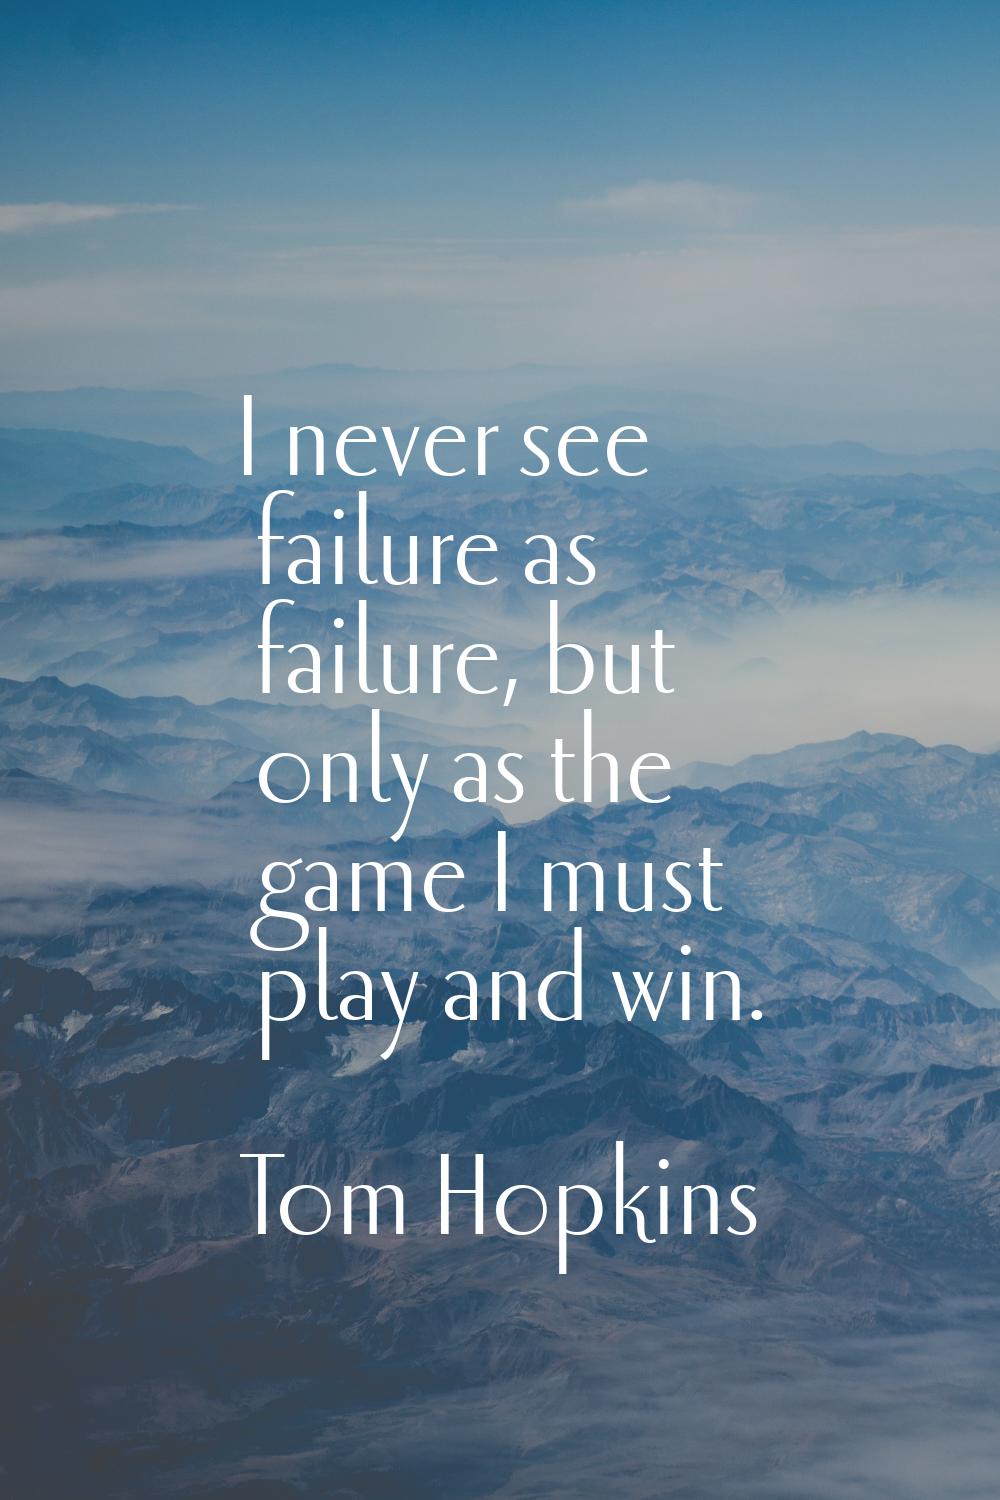 I never see failure as failure, but only as the game I must play and win.